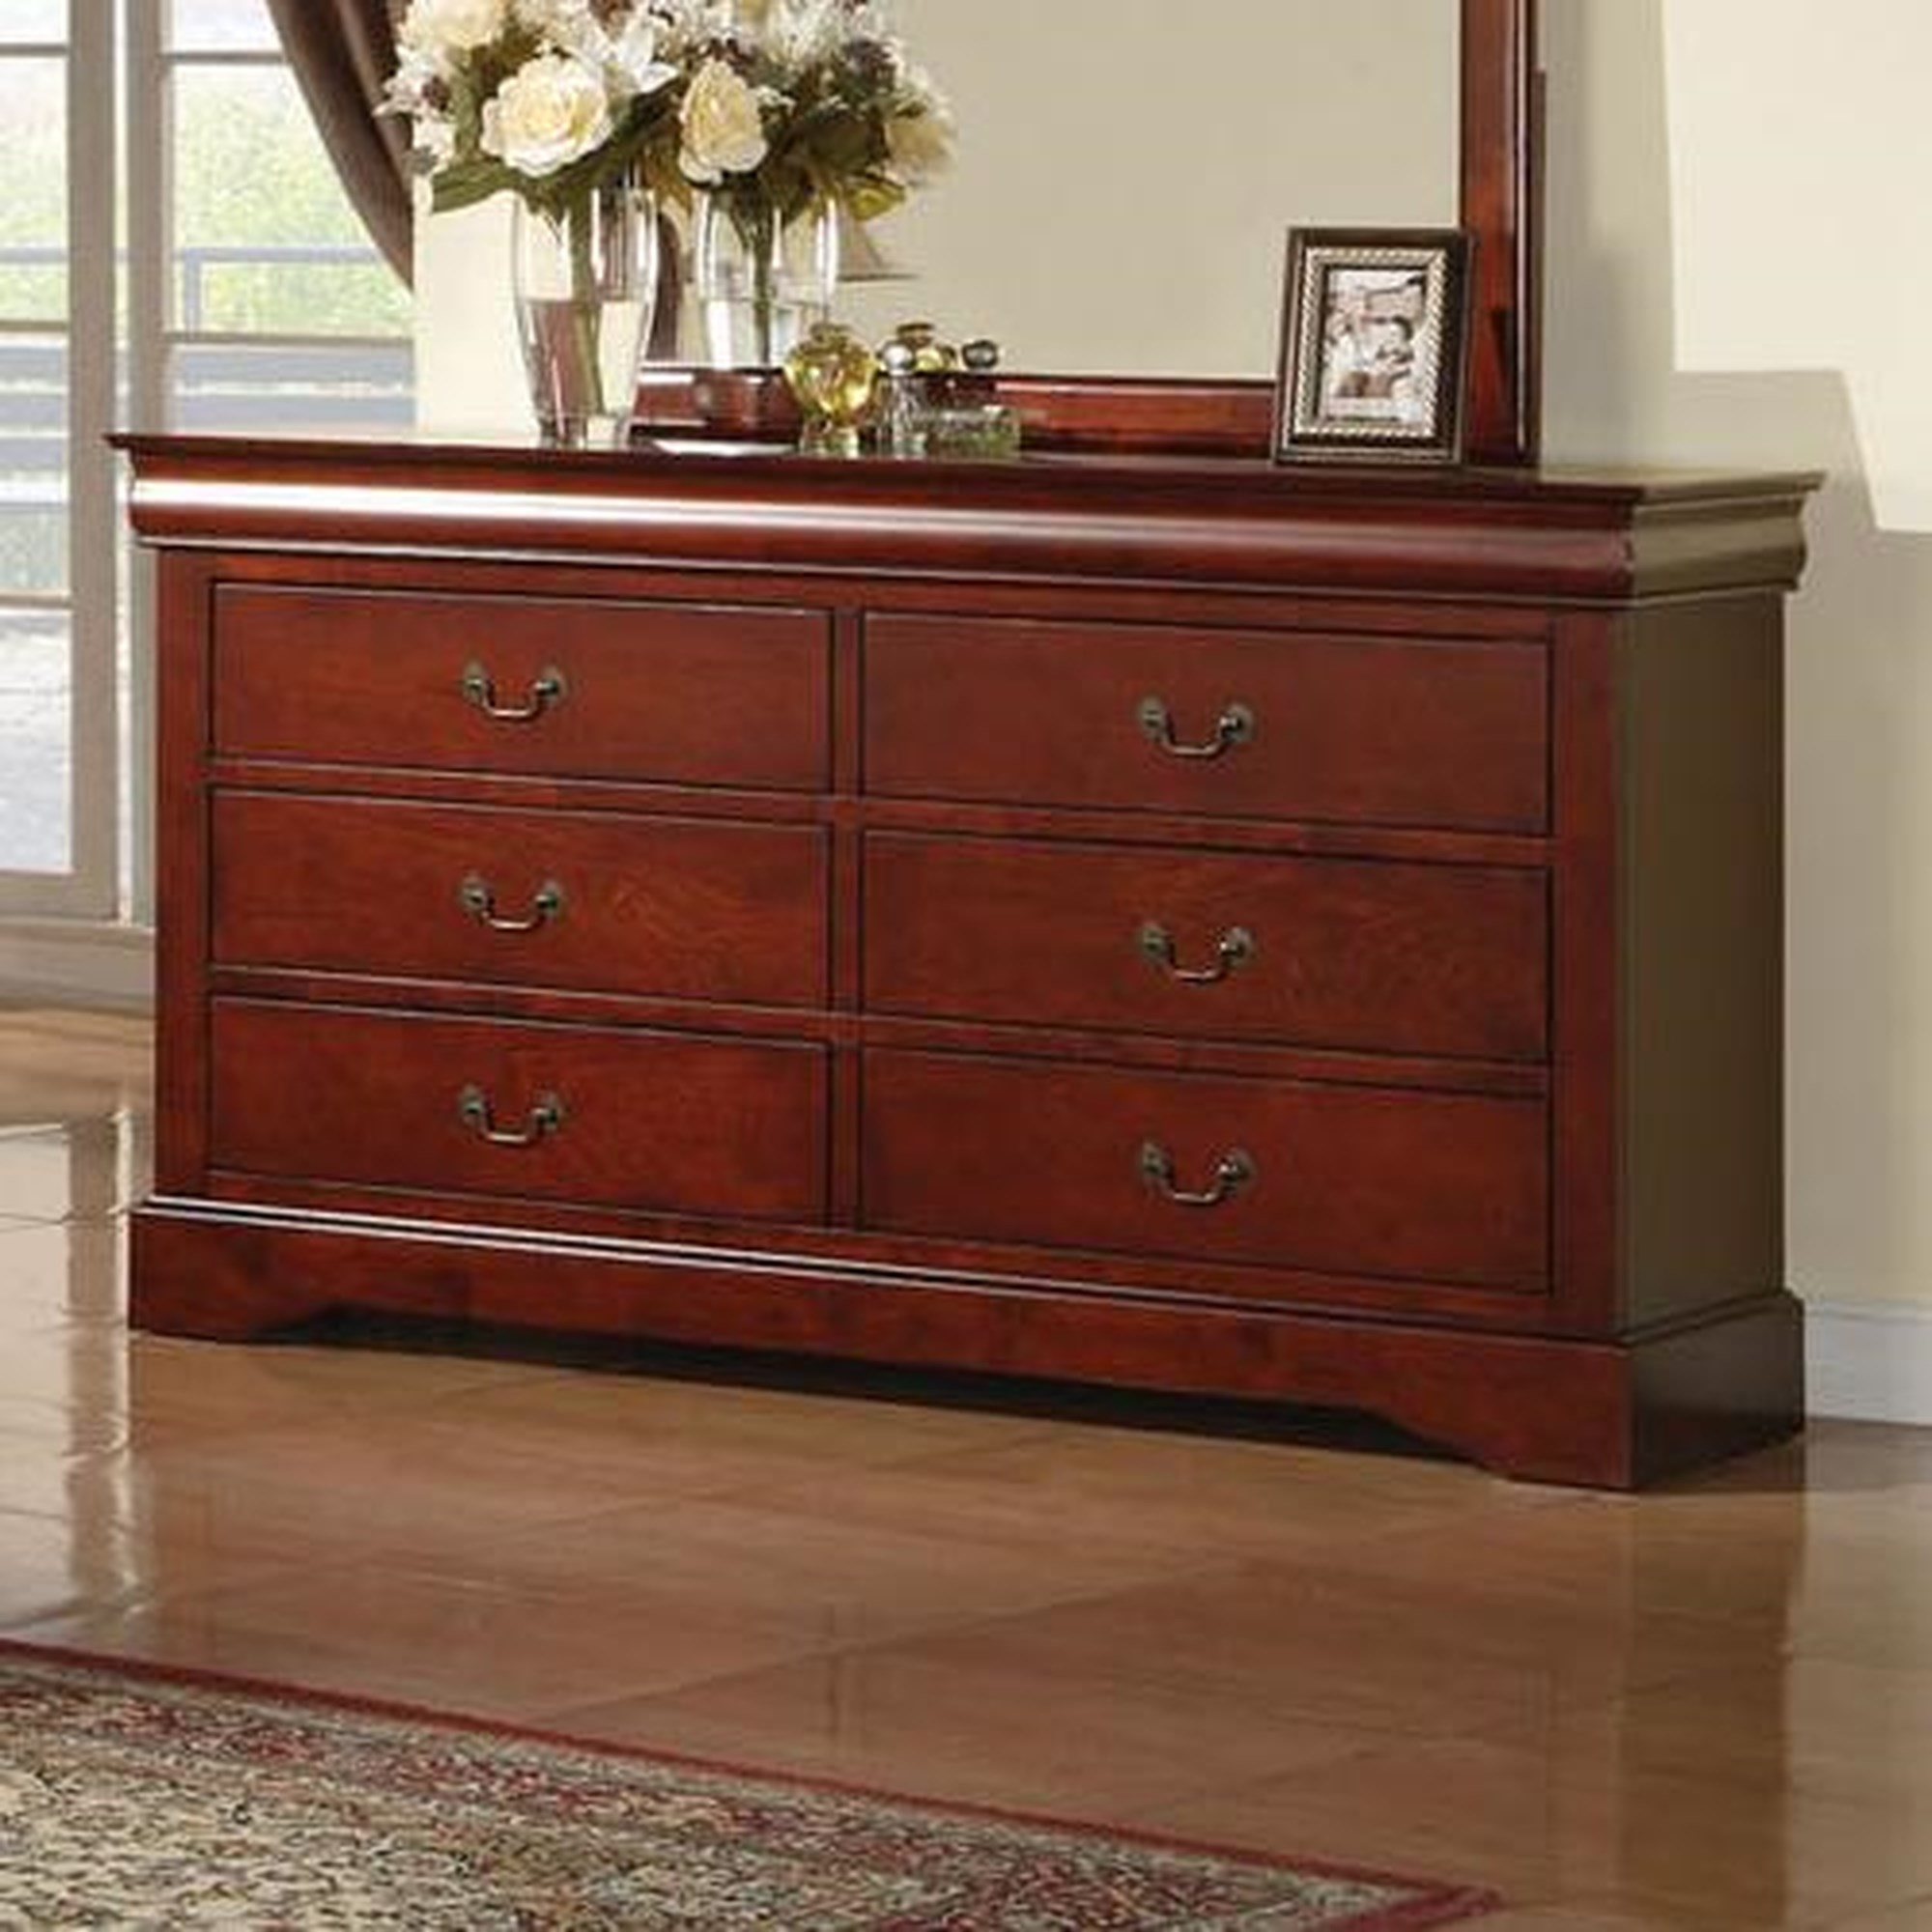  Acme Louis Philippe Eastern King Bed in Cherry : Home & Kitchen